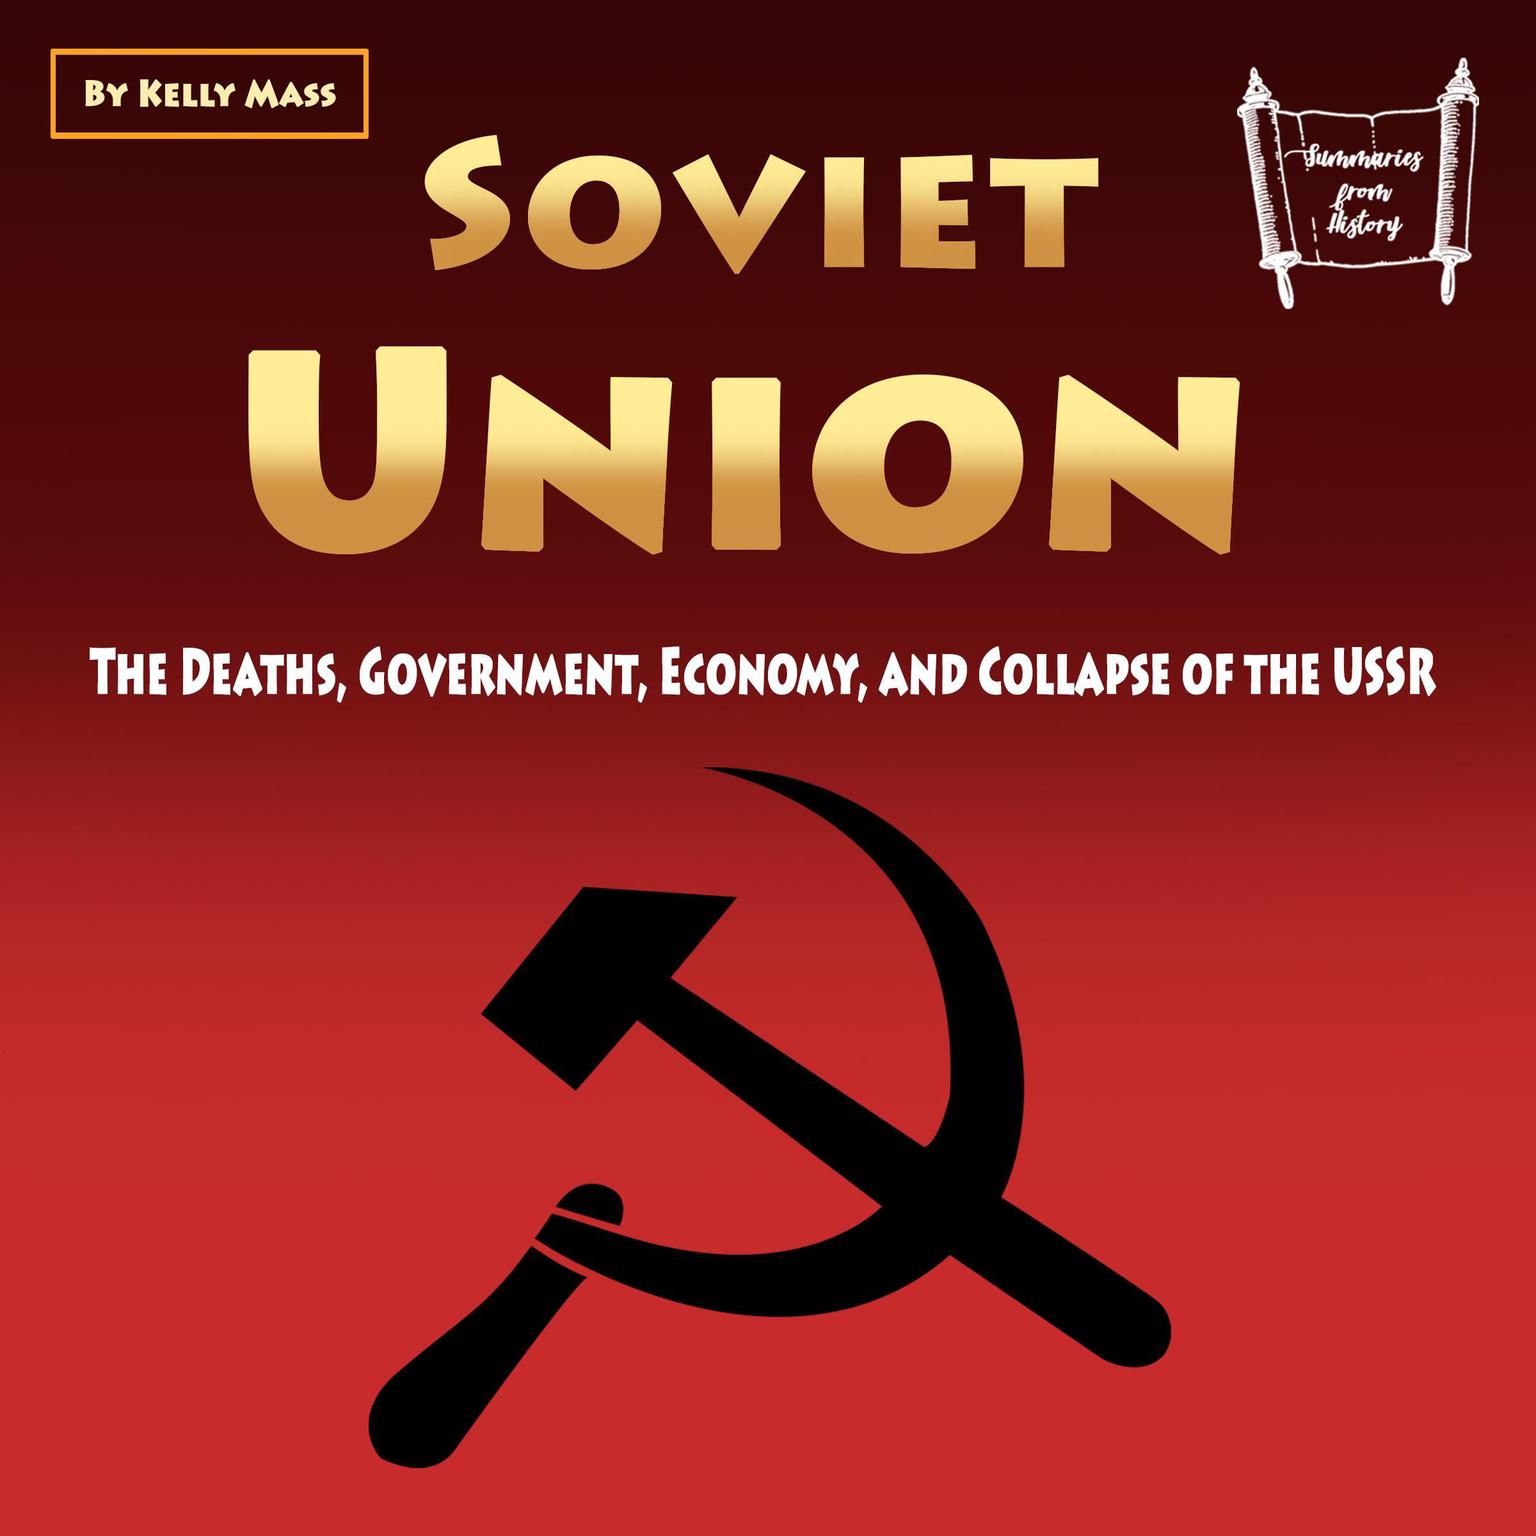 Soviet Union: The Deaths, Government, Economy, and Collapse of the USSR Audiobook, by Kelly Mass